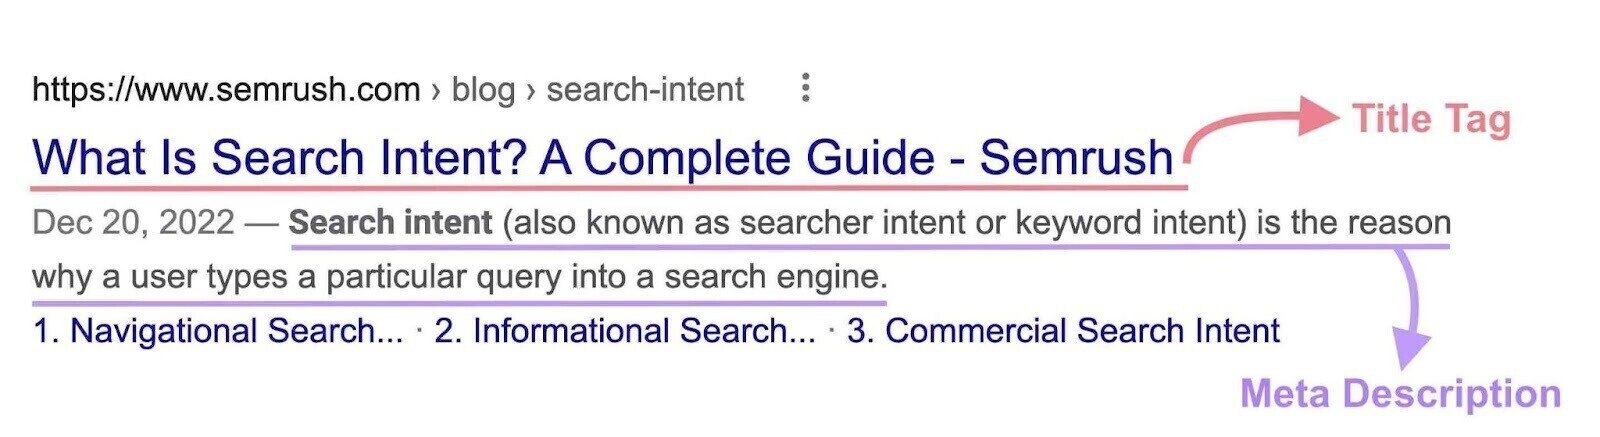 Title tag and meta description shown on Google SERP